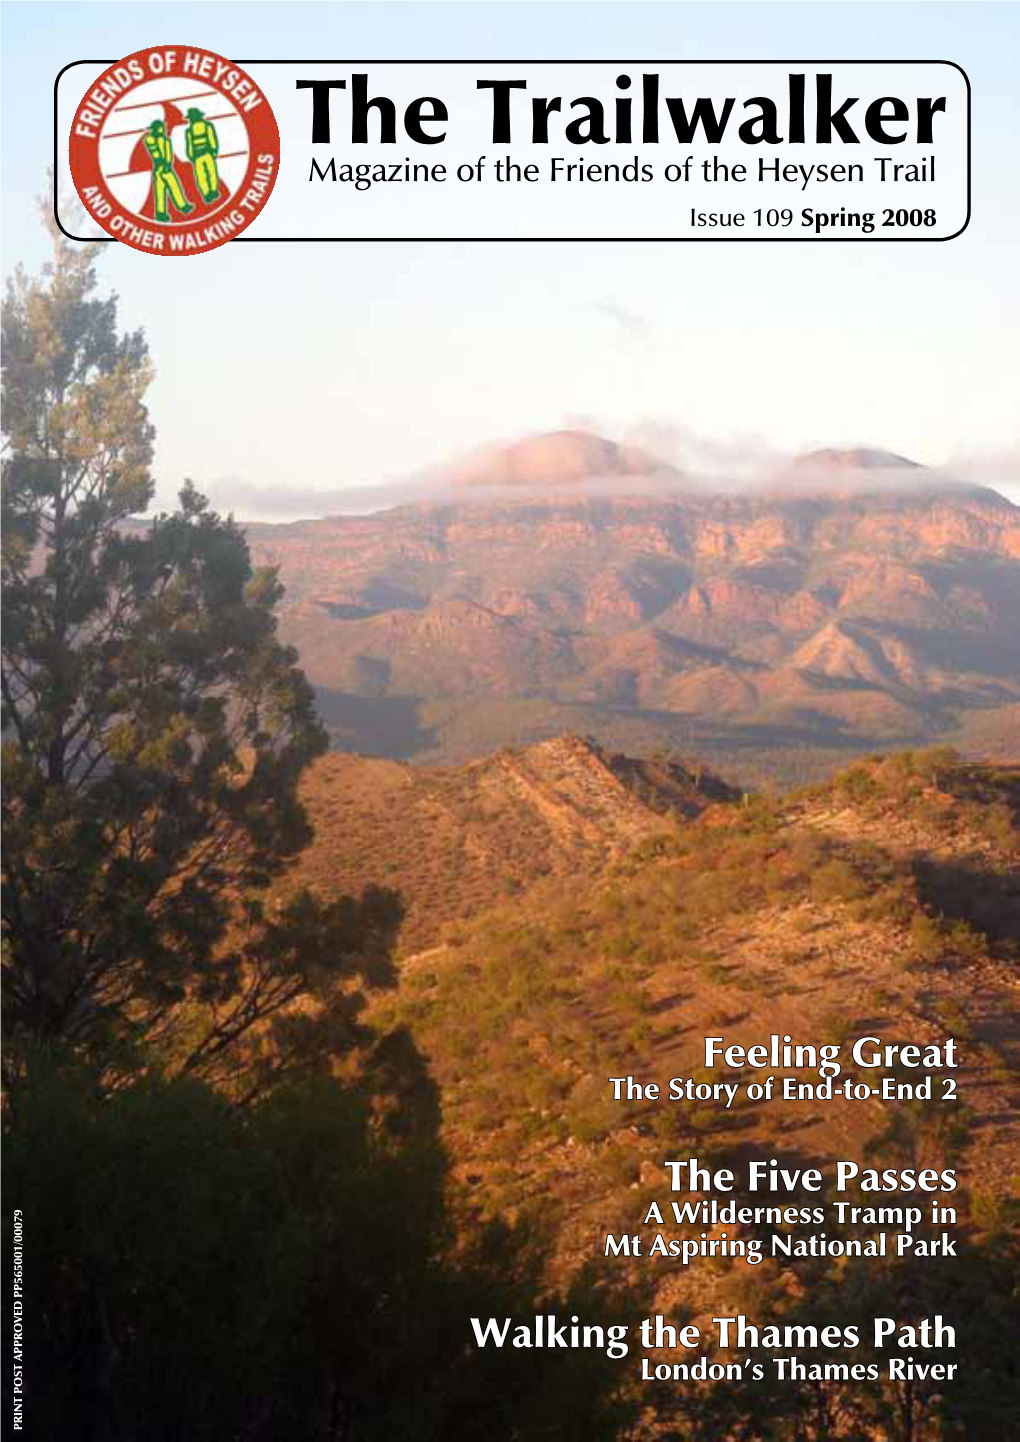 The Trailwalker Magazine of the Friends of the Heysen Trail Issue 109 Spring 2008